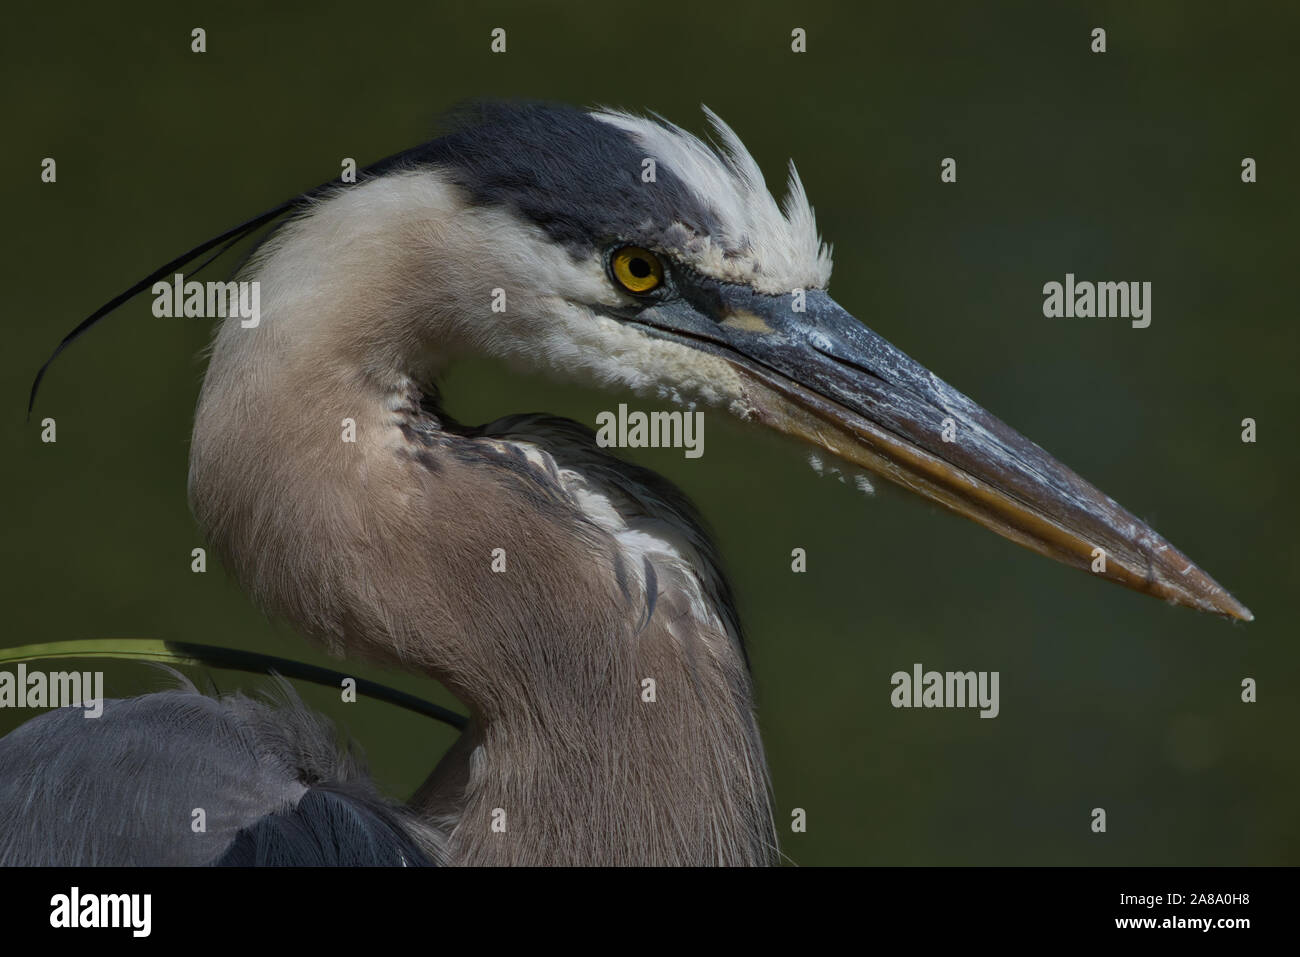 Great Blue Heron Portrait On a Rural New Jersey Pond With Green Duckweed Background Stock Photo